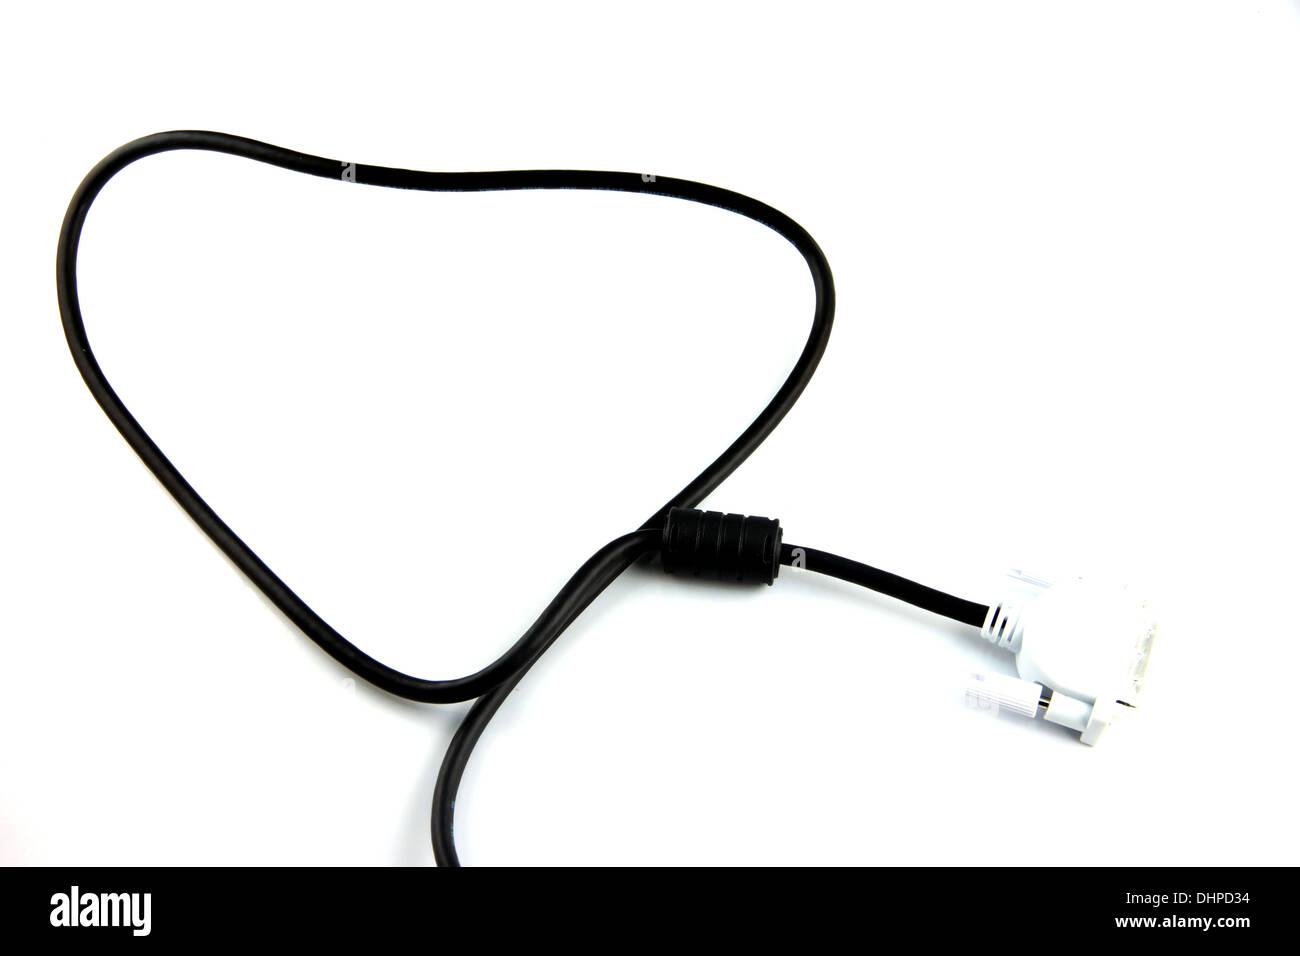 Black cable used to connect the computer on white background. Stock Photo